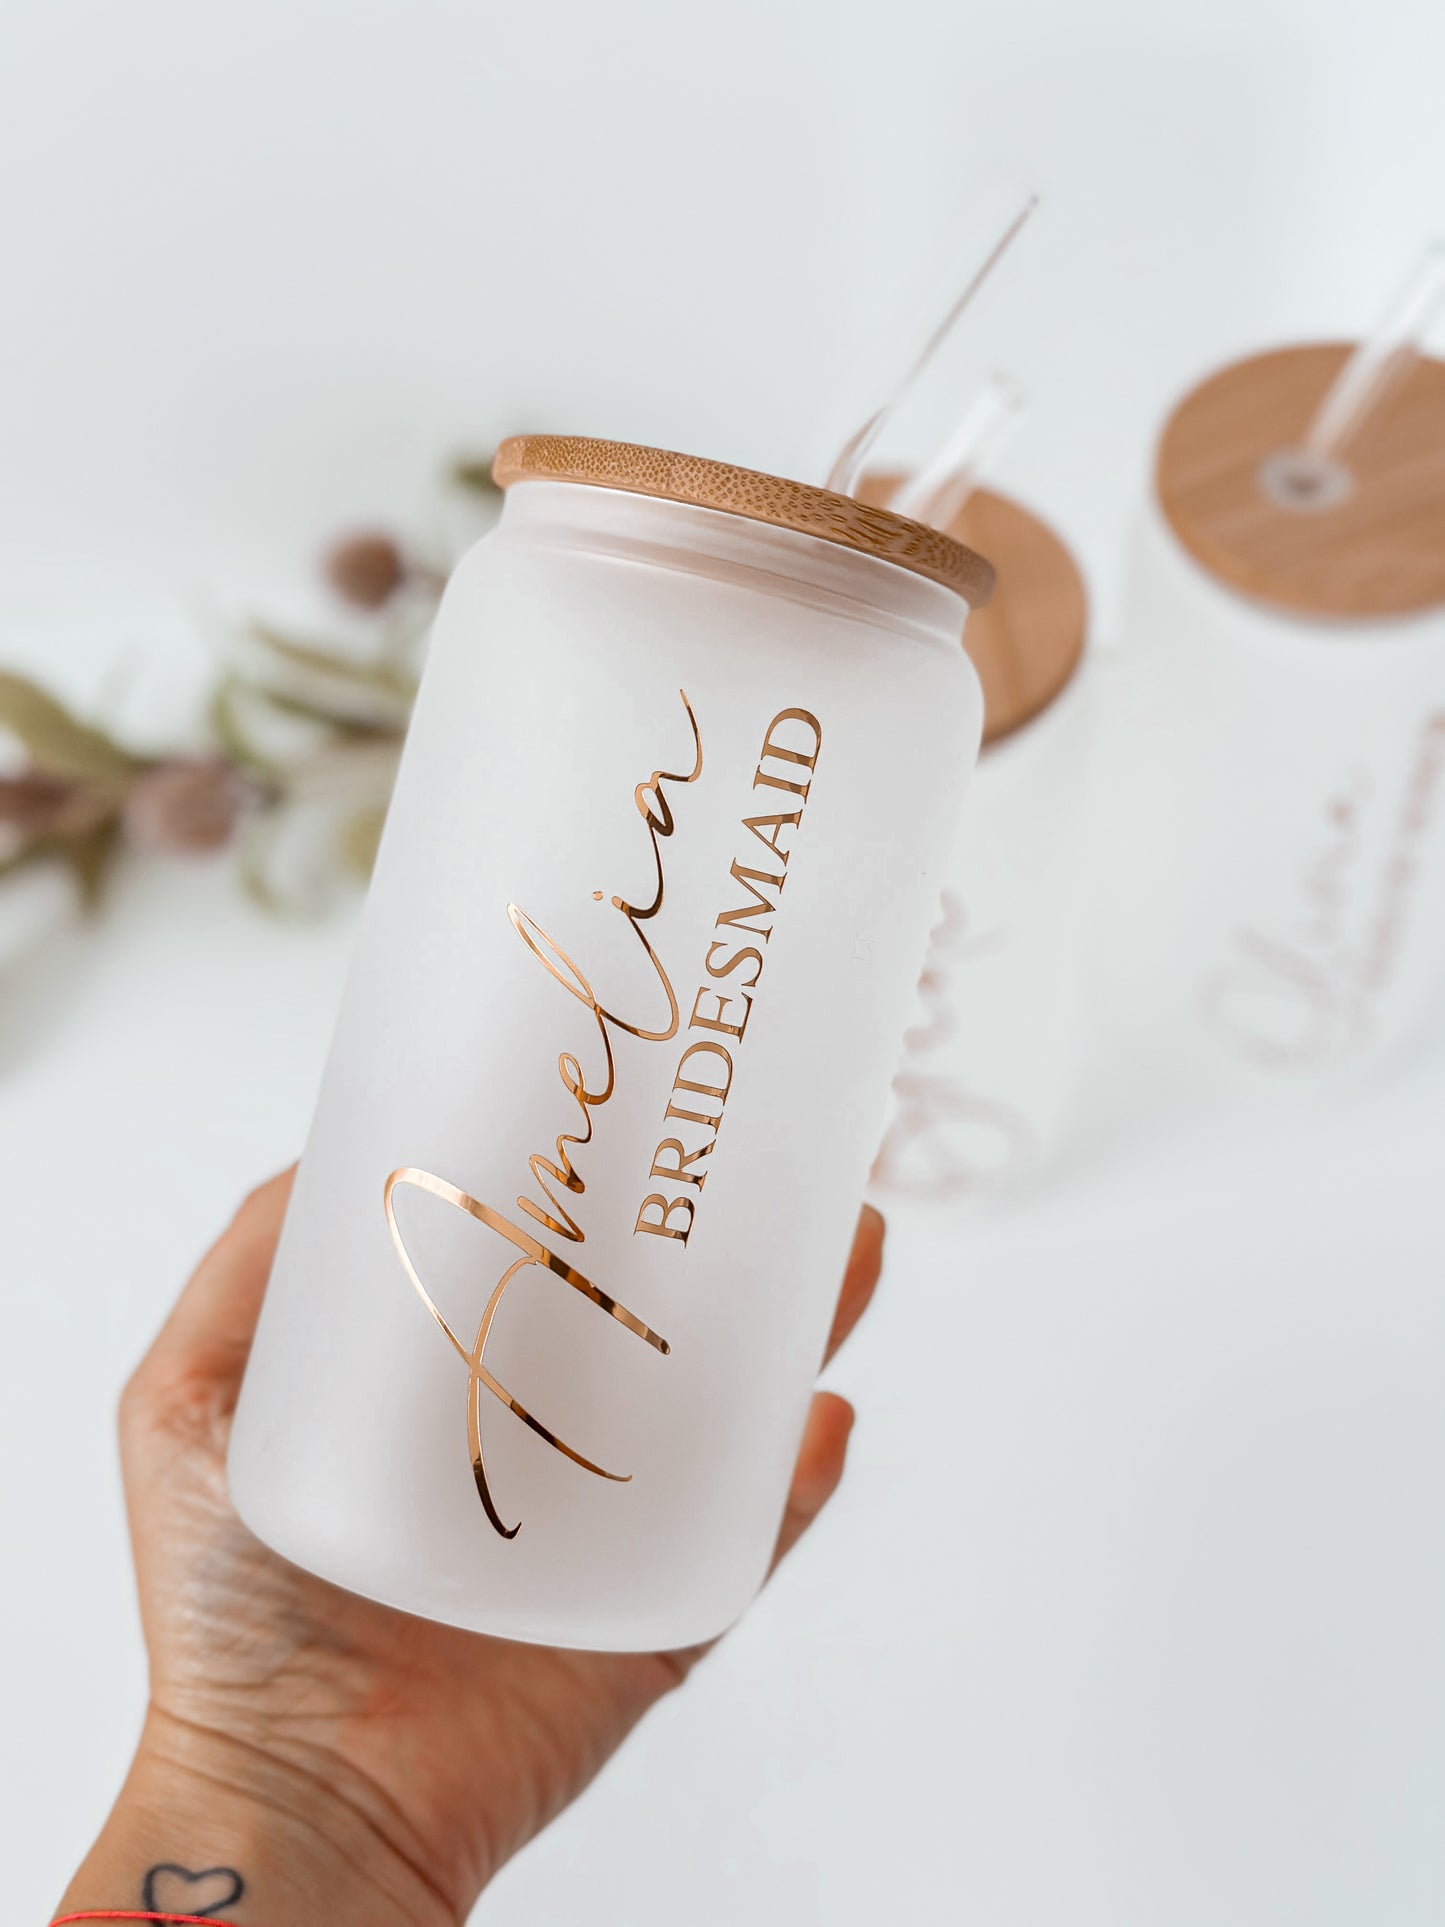 Personalized Bridesmaid Glass Tumblers